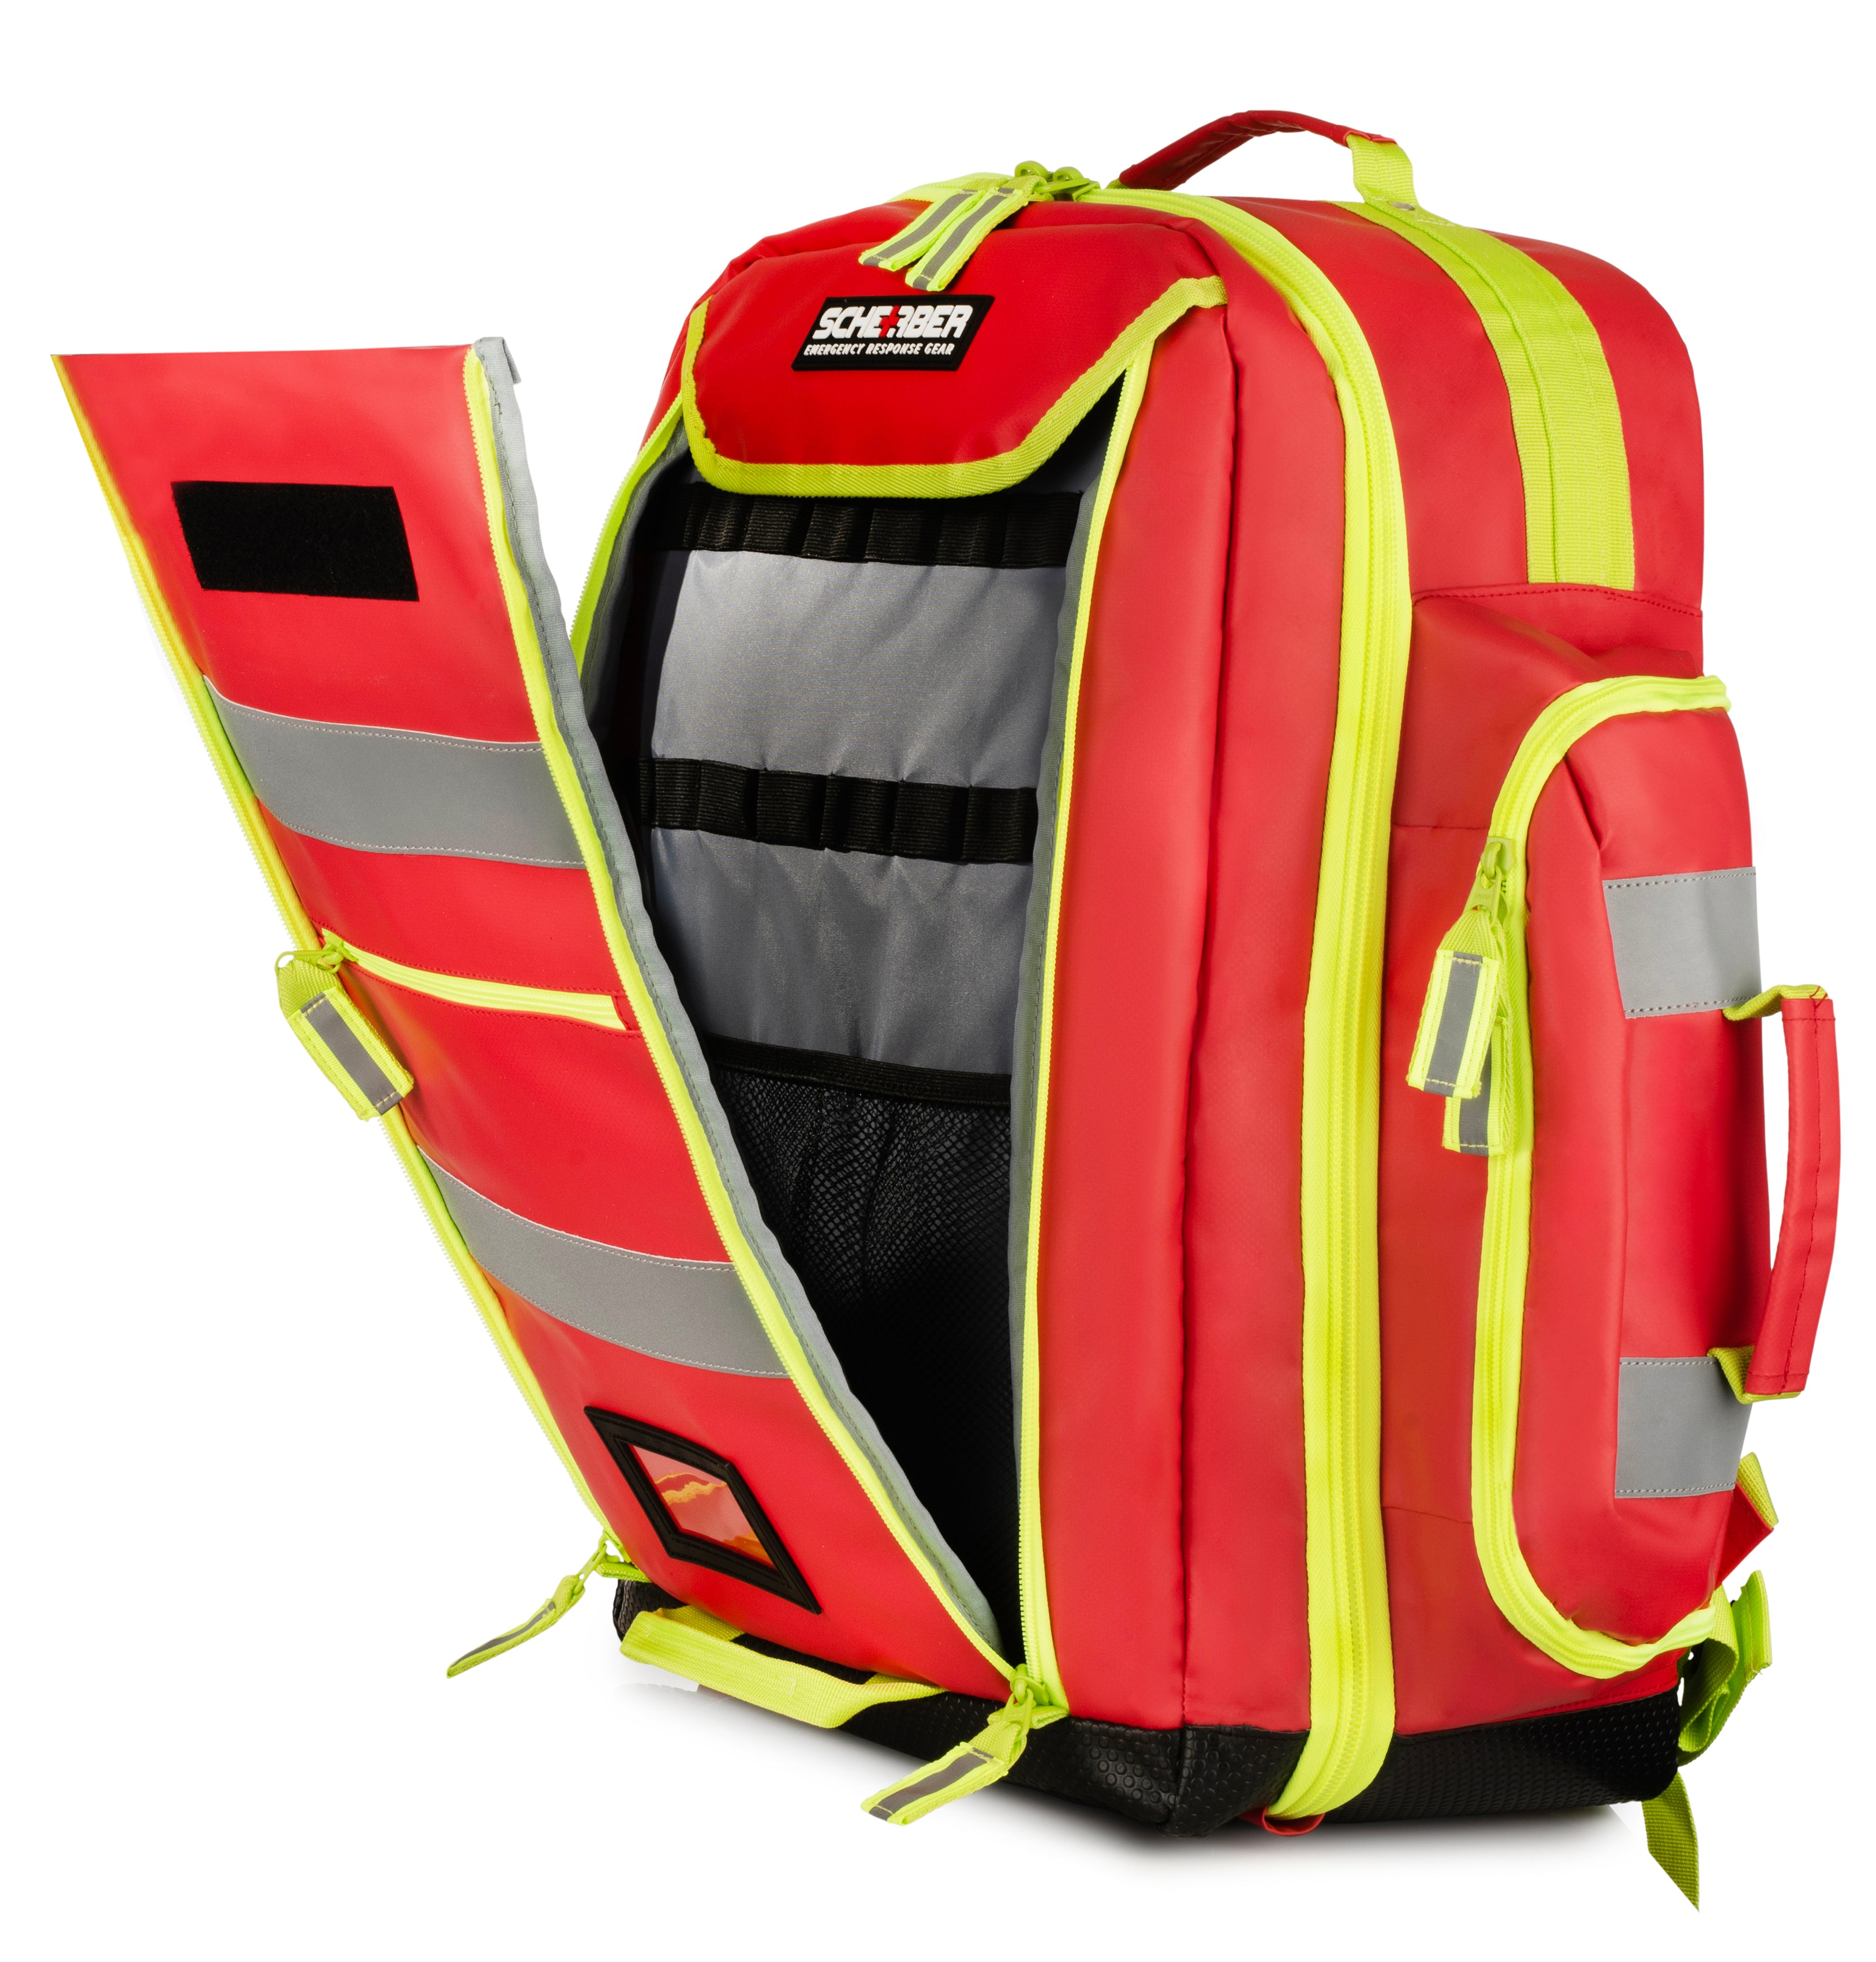 Scherber Ultimate First Responder Trauma O2 Backpack - Fully Stocked